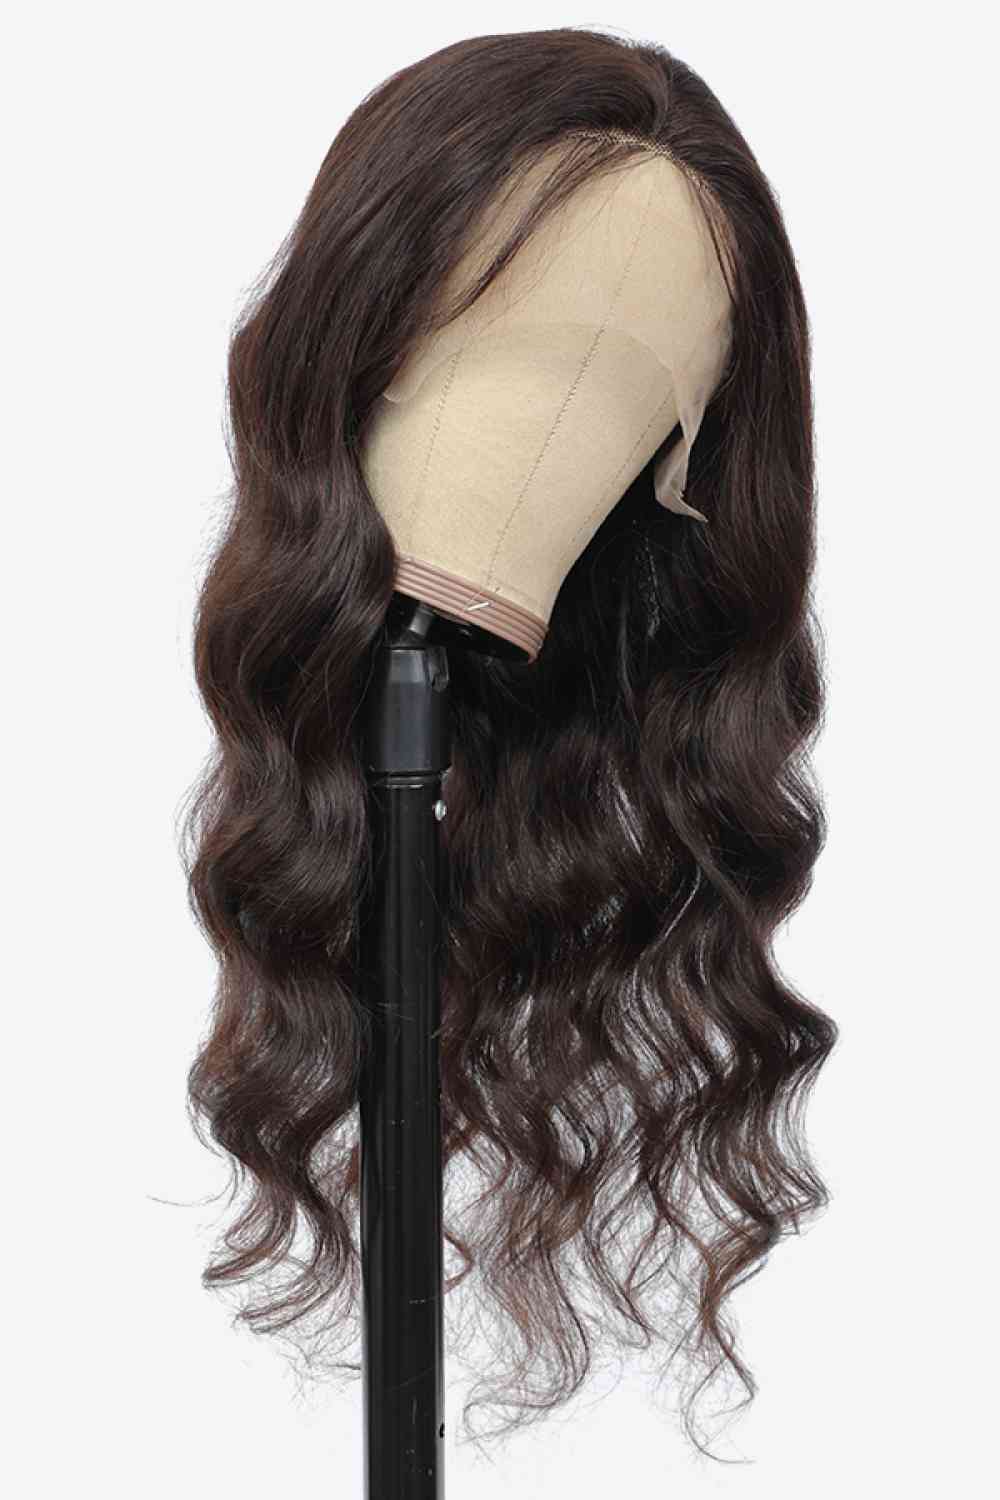 20" 13x4 Lace Front Wigs Body Wave Human Virgin Hair Natural Color 150% Density - lolaluxeshop